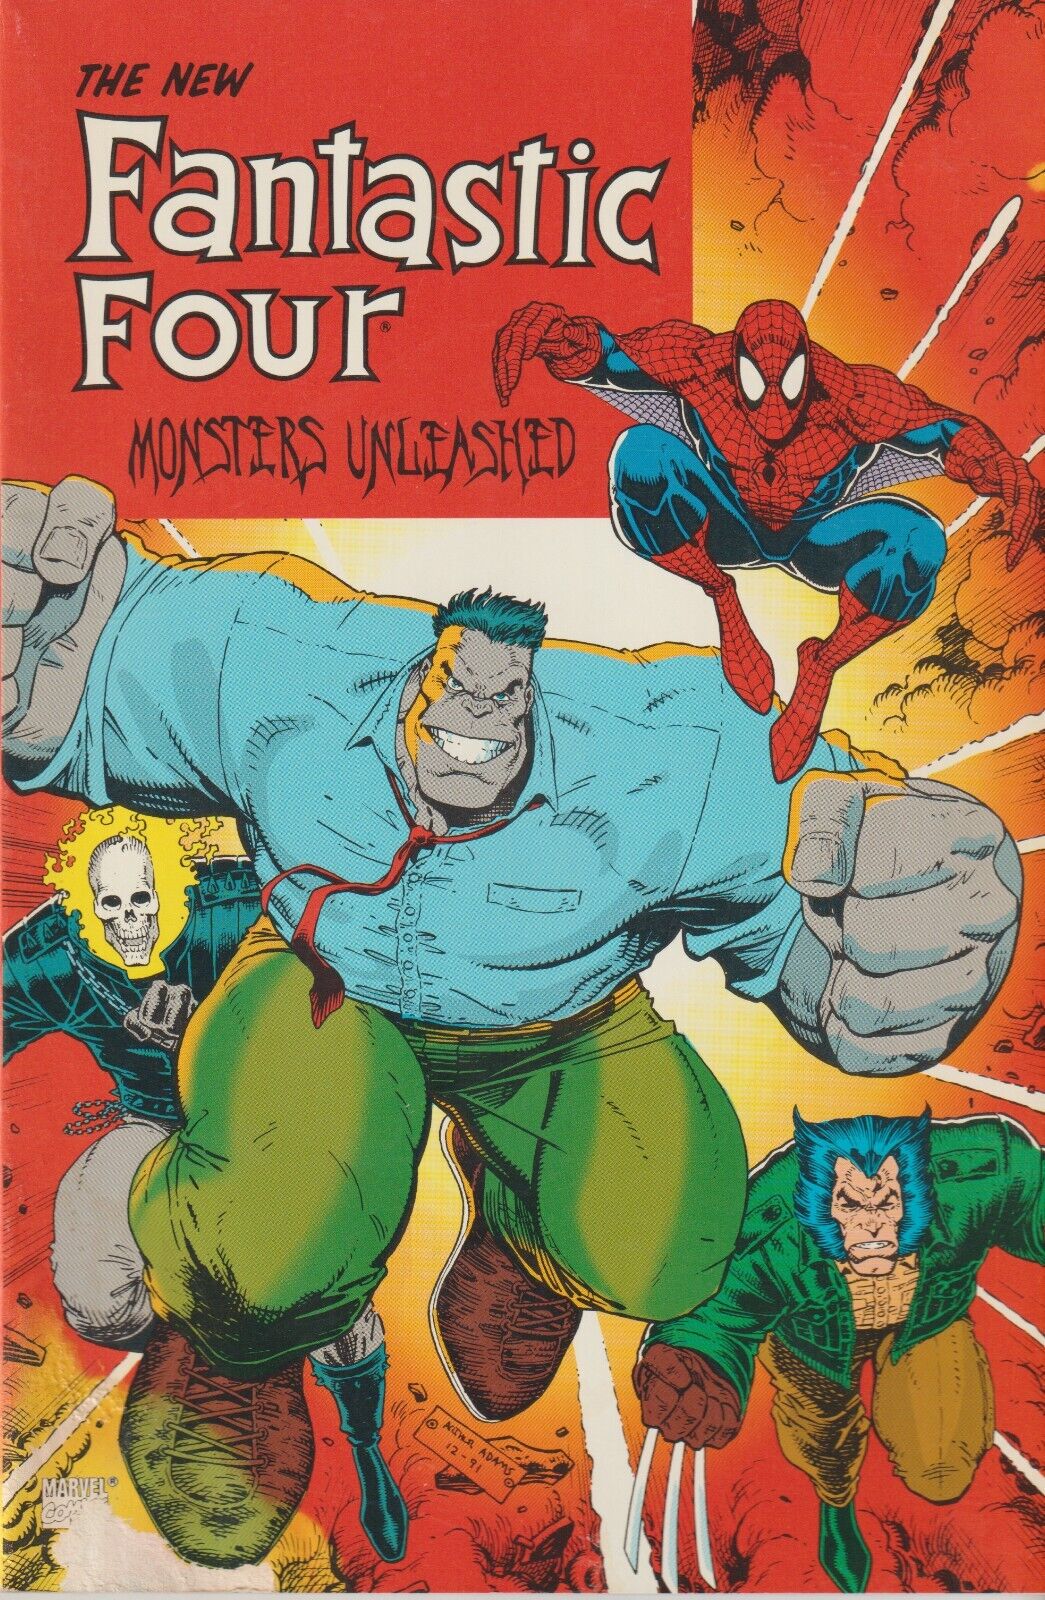 The New Fantastic Four: Monsters Unleashed Trade 1st Printing Marvel 1992